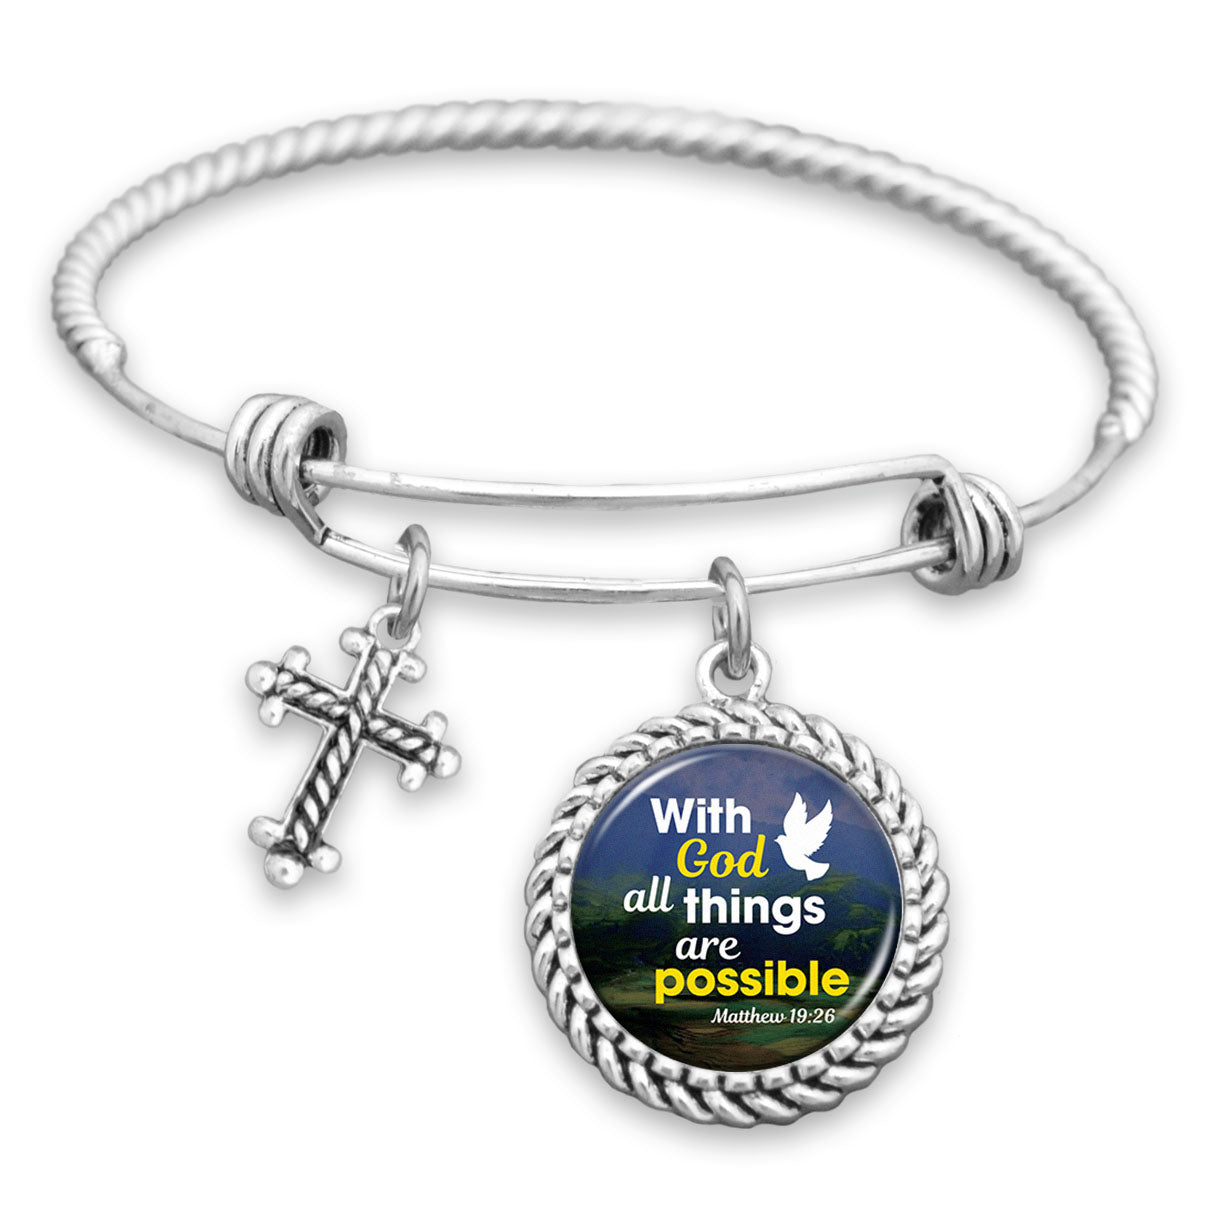 With God All Things Are Possible Charm Bracelet